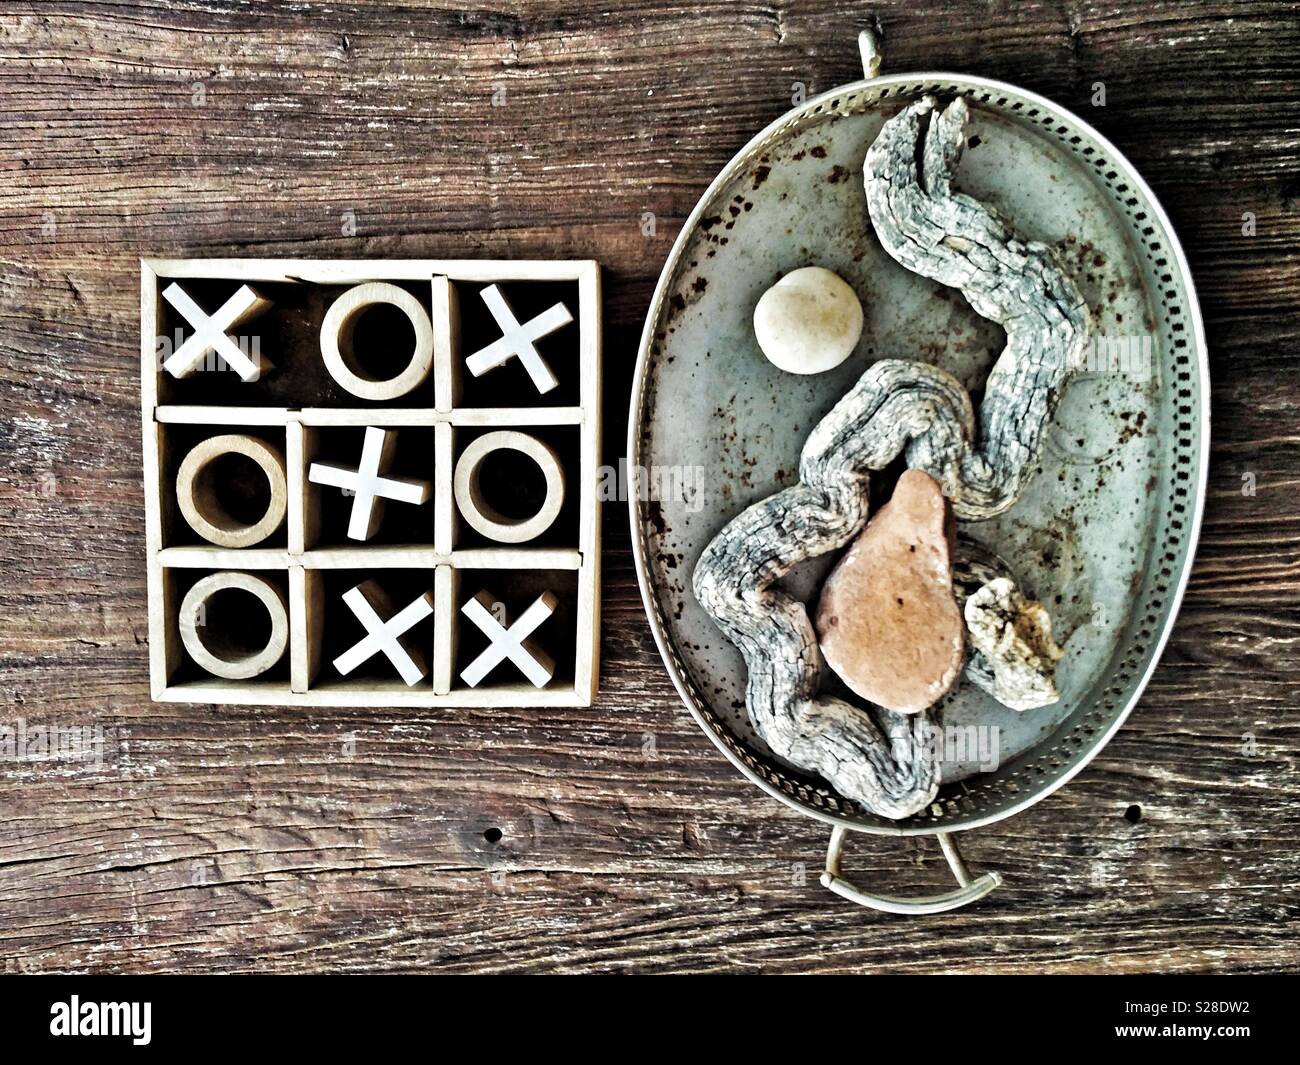 Noughts and crosses or tic-tac-toe children's game next to a decorative tray of objects on a grainy tabletop. Crosses win. Stock Photo